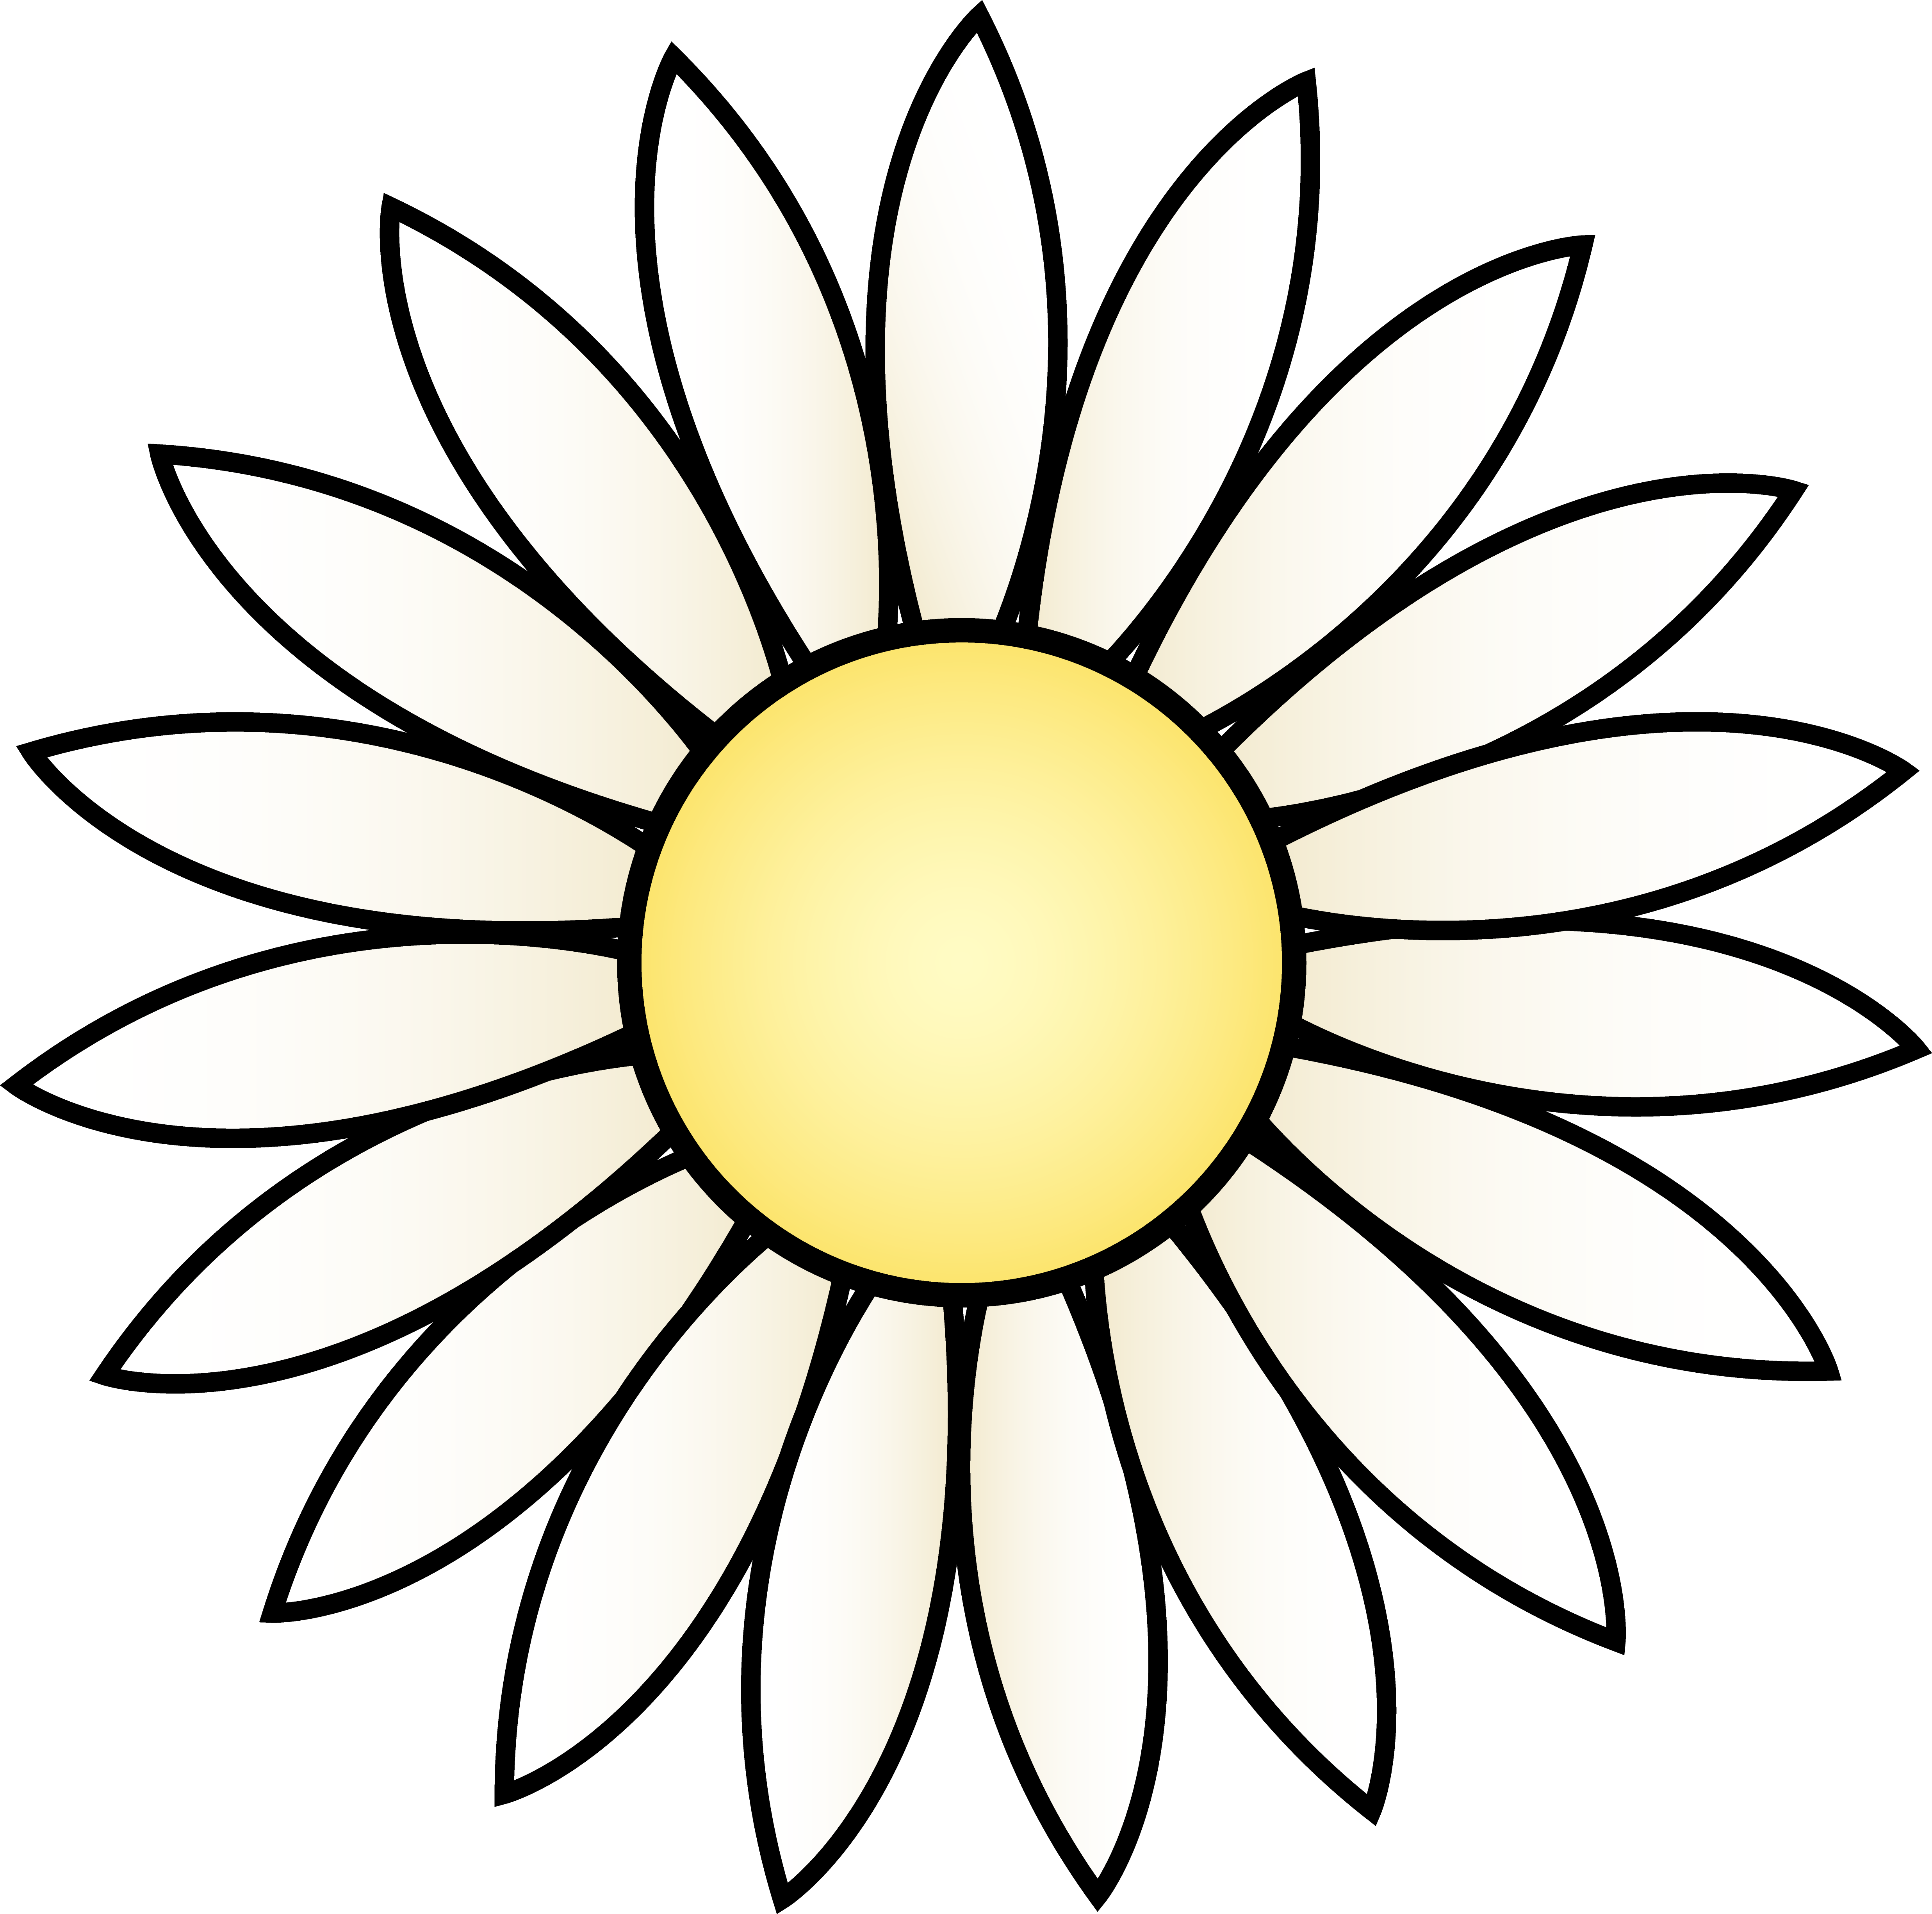 daisy clipart black and white